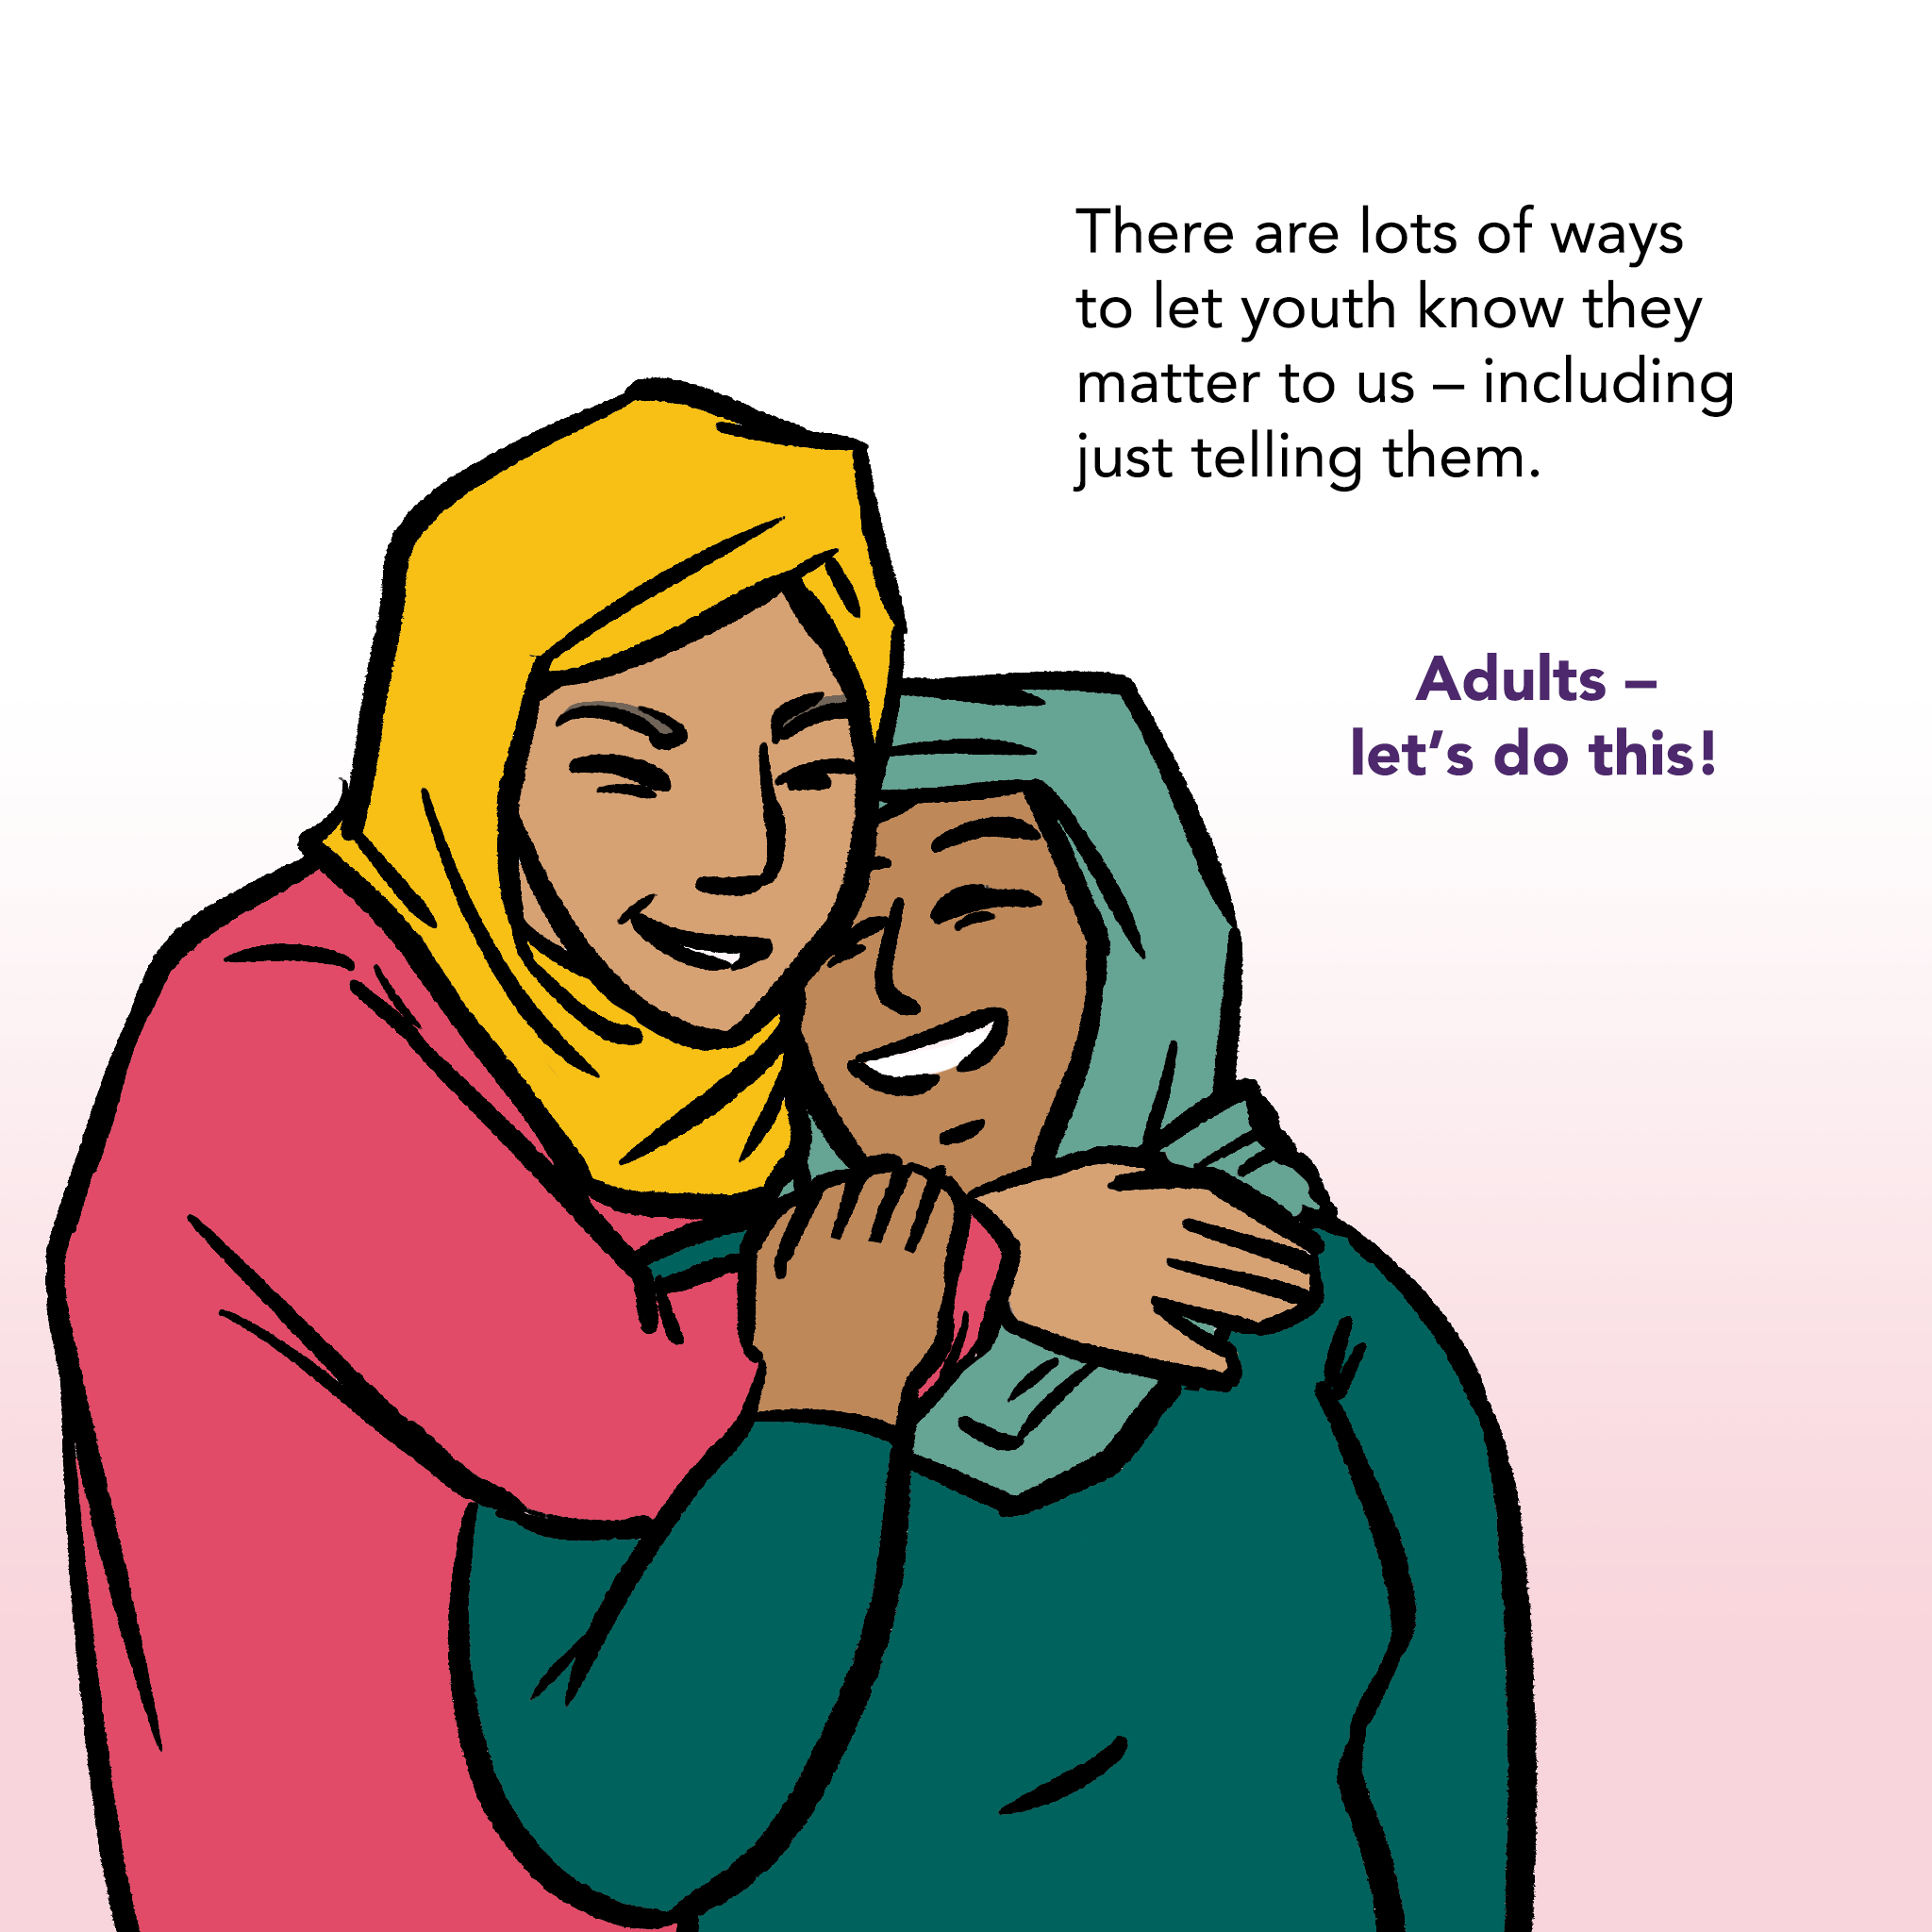 Image of a smiling adult and youth hugging. Caption says "There are lots of ways to let youth know they matter to us - including just telling them. Adults - let's do this!"